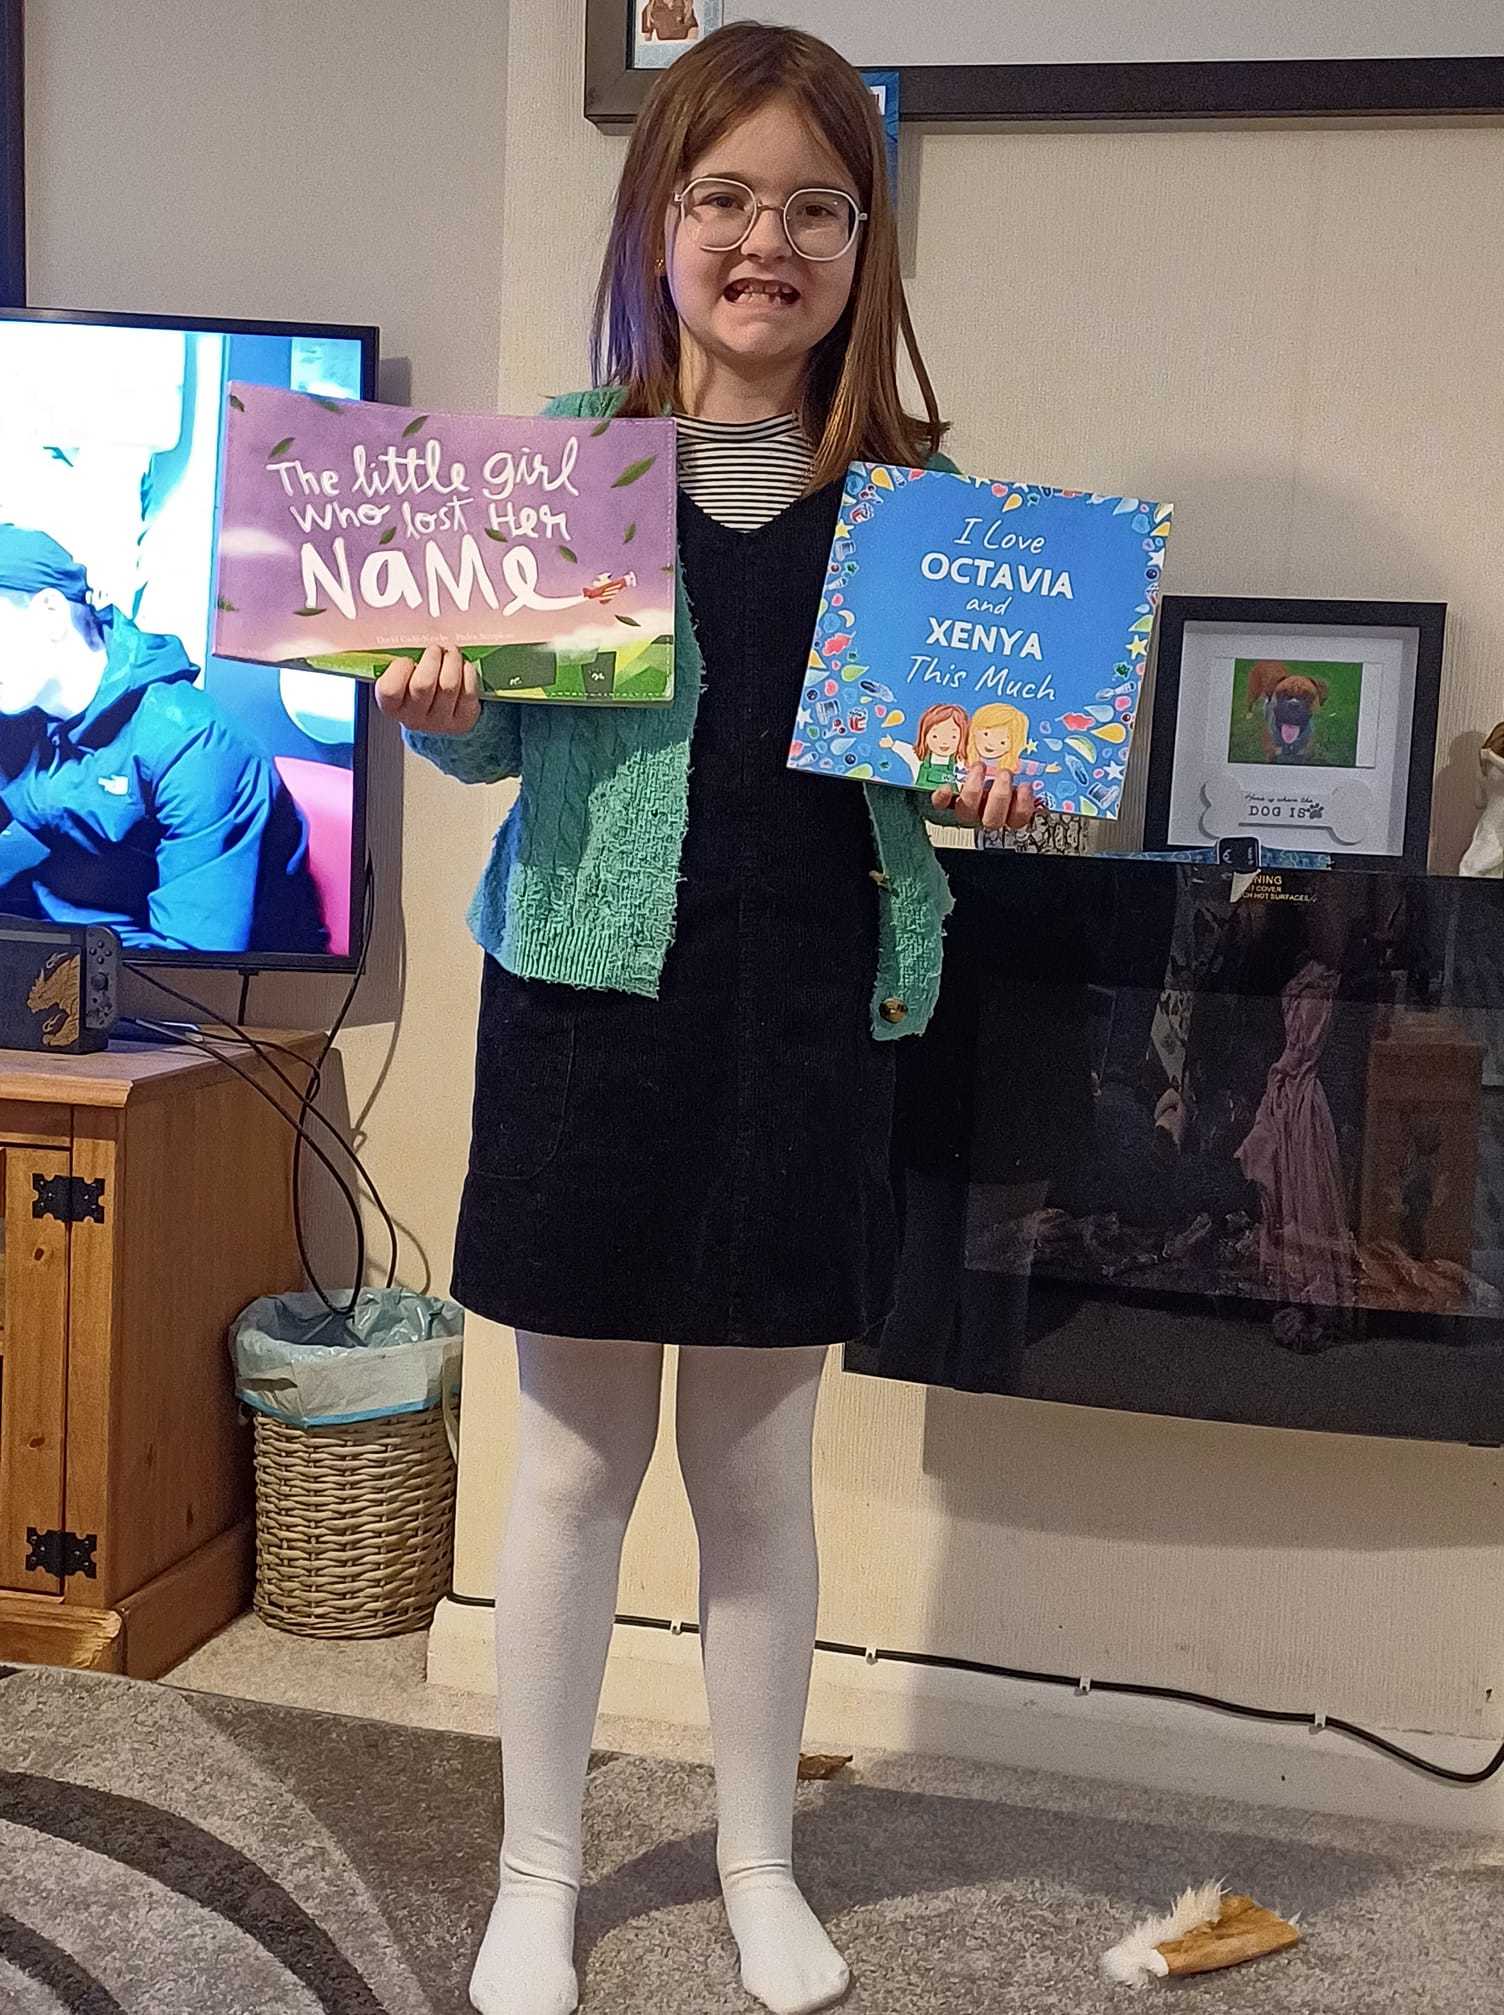 Michaela Jade Lunt: My daughter Octavia has gone dressed up as herself. We had books made when she was little with her as the main character. She came up with the idea herself. Genius idea i think.